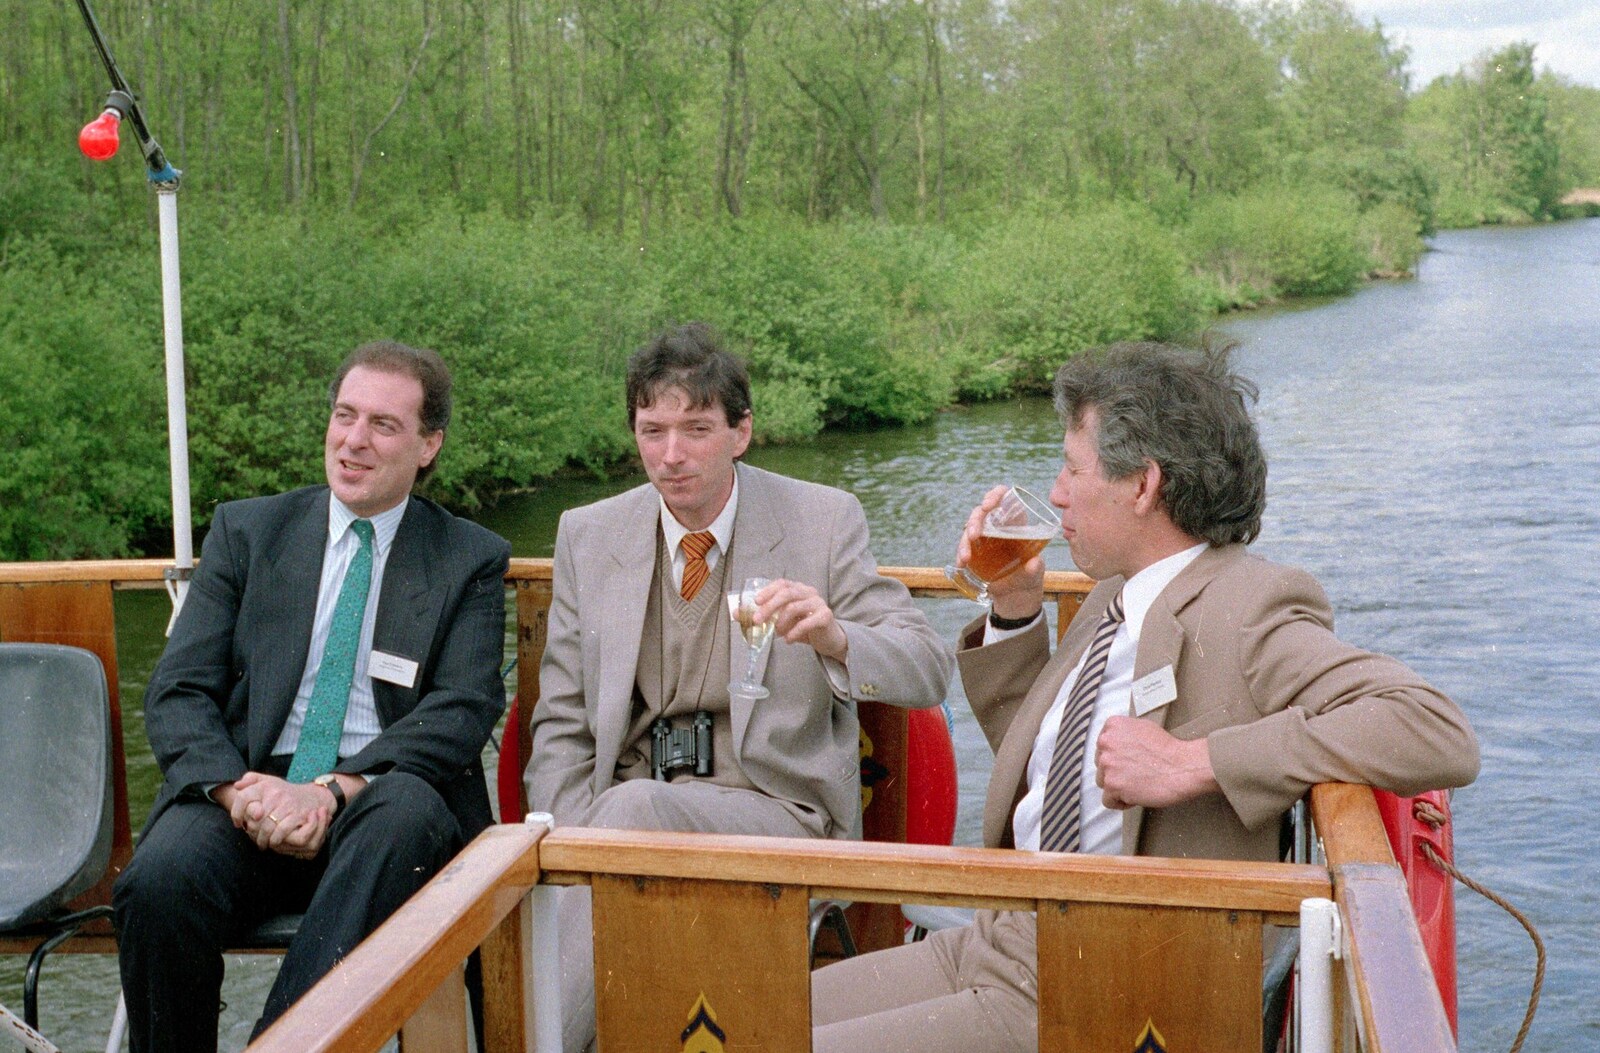 Chris Playford (right) has a slurp from A Soman-Wherry Press Boat Trip, Horning, The Broads, Norfolk - 8th May 1988